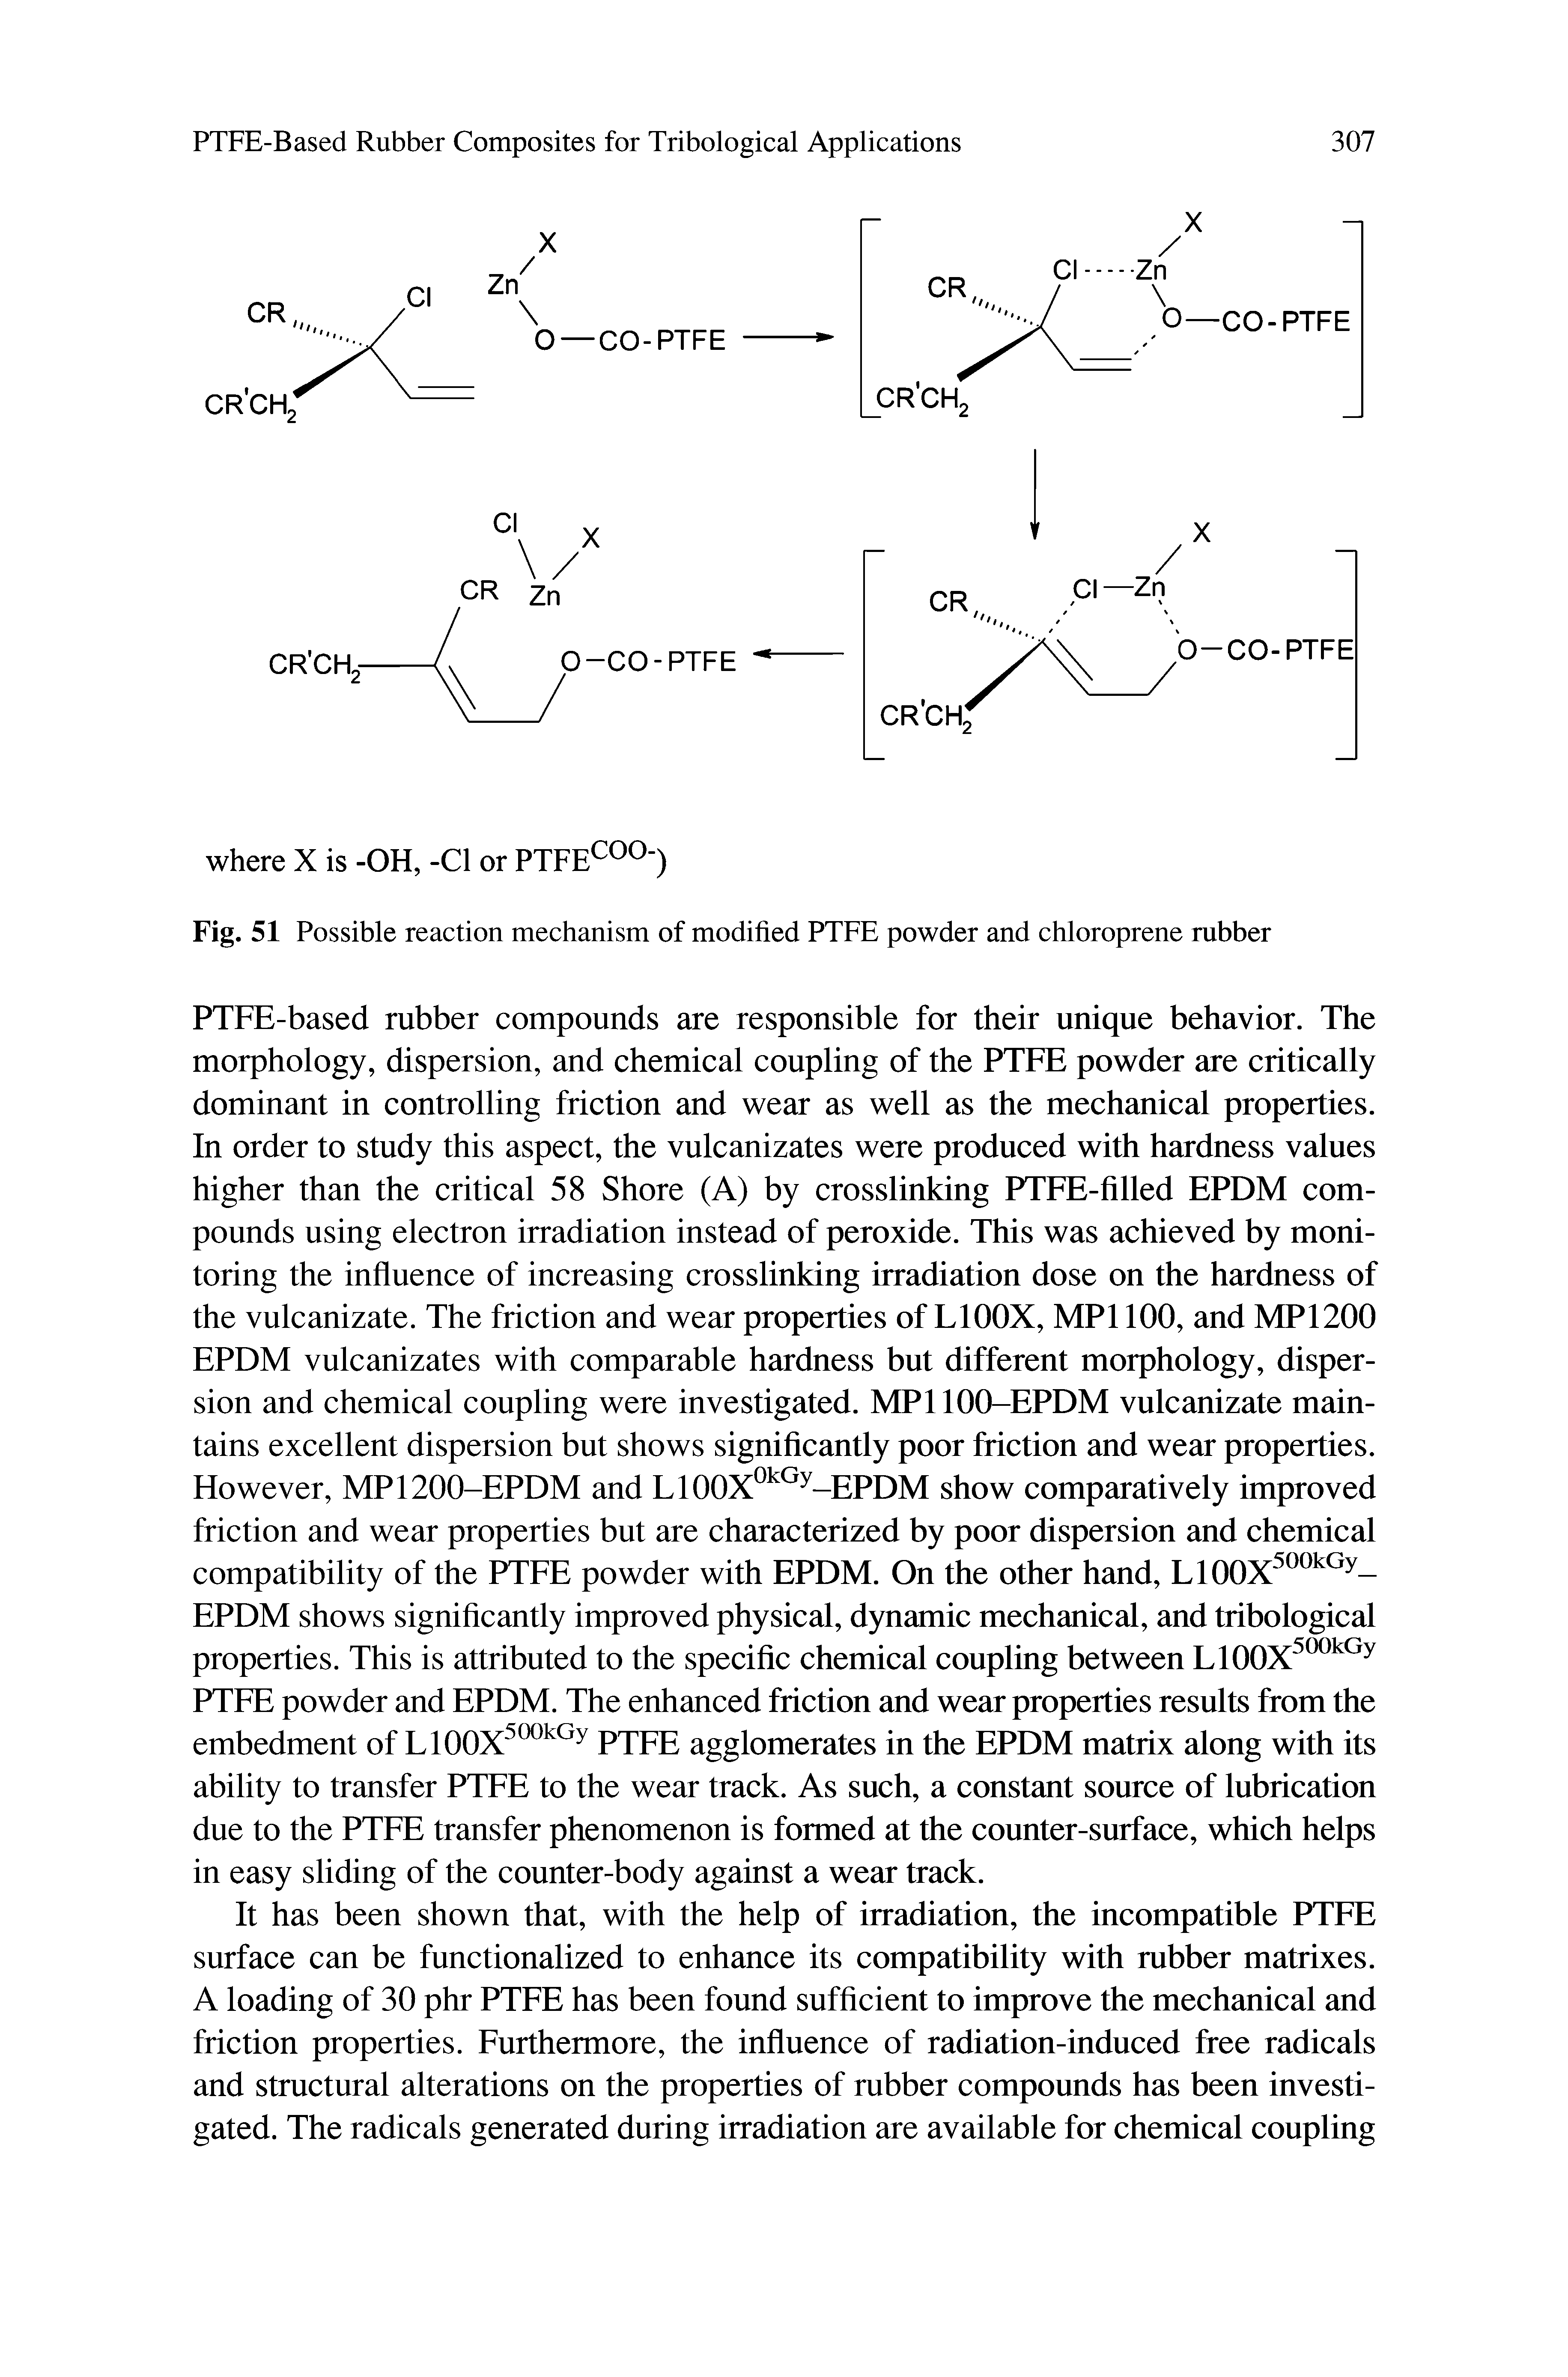 Fig. 51 Possible reaction mechanism of modified PTFE powder and chloroprene rubber...